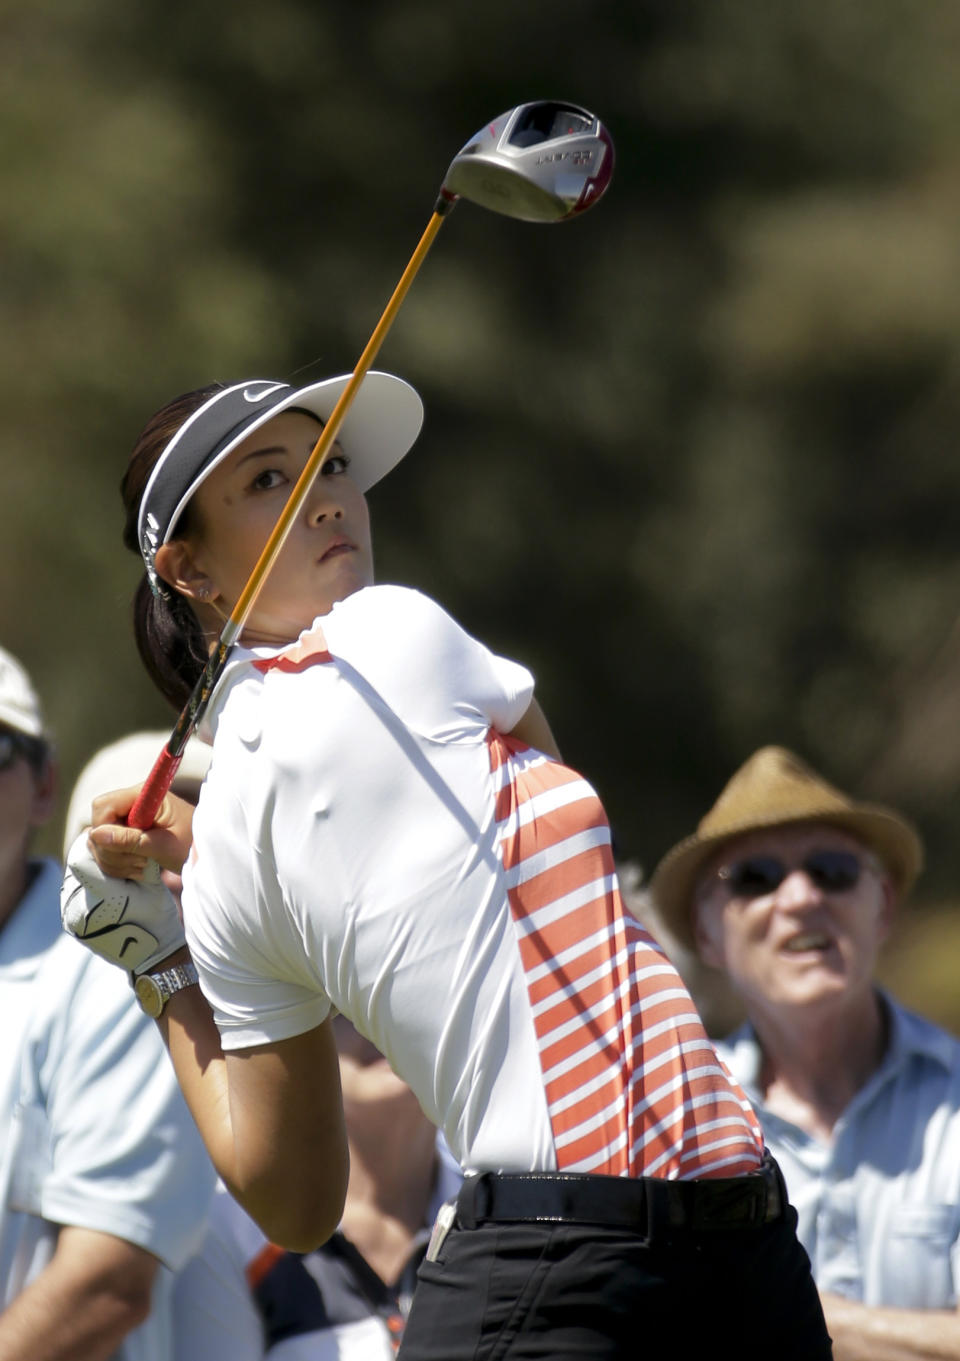 Michelle Wie watches her tee shot on the second hole during the third round of the Kraft Nabisco Championship golf tournament Saturday, April 5, 2014 in Rancho Mirage, Calif. (AP Photo/Chris Carlson)